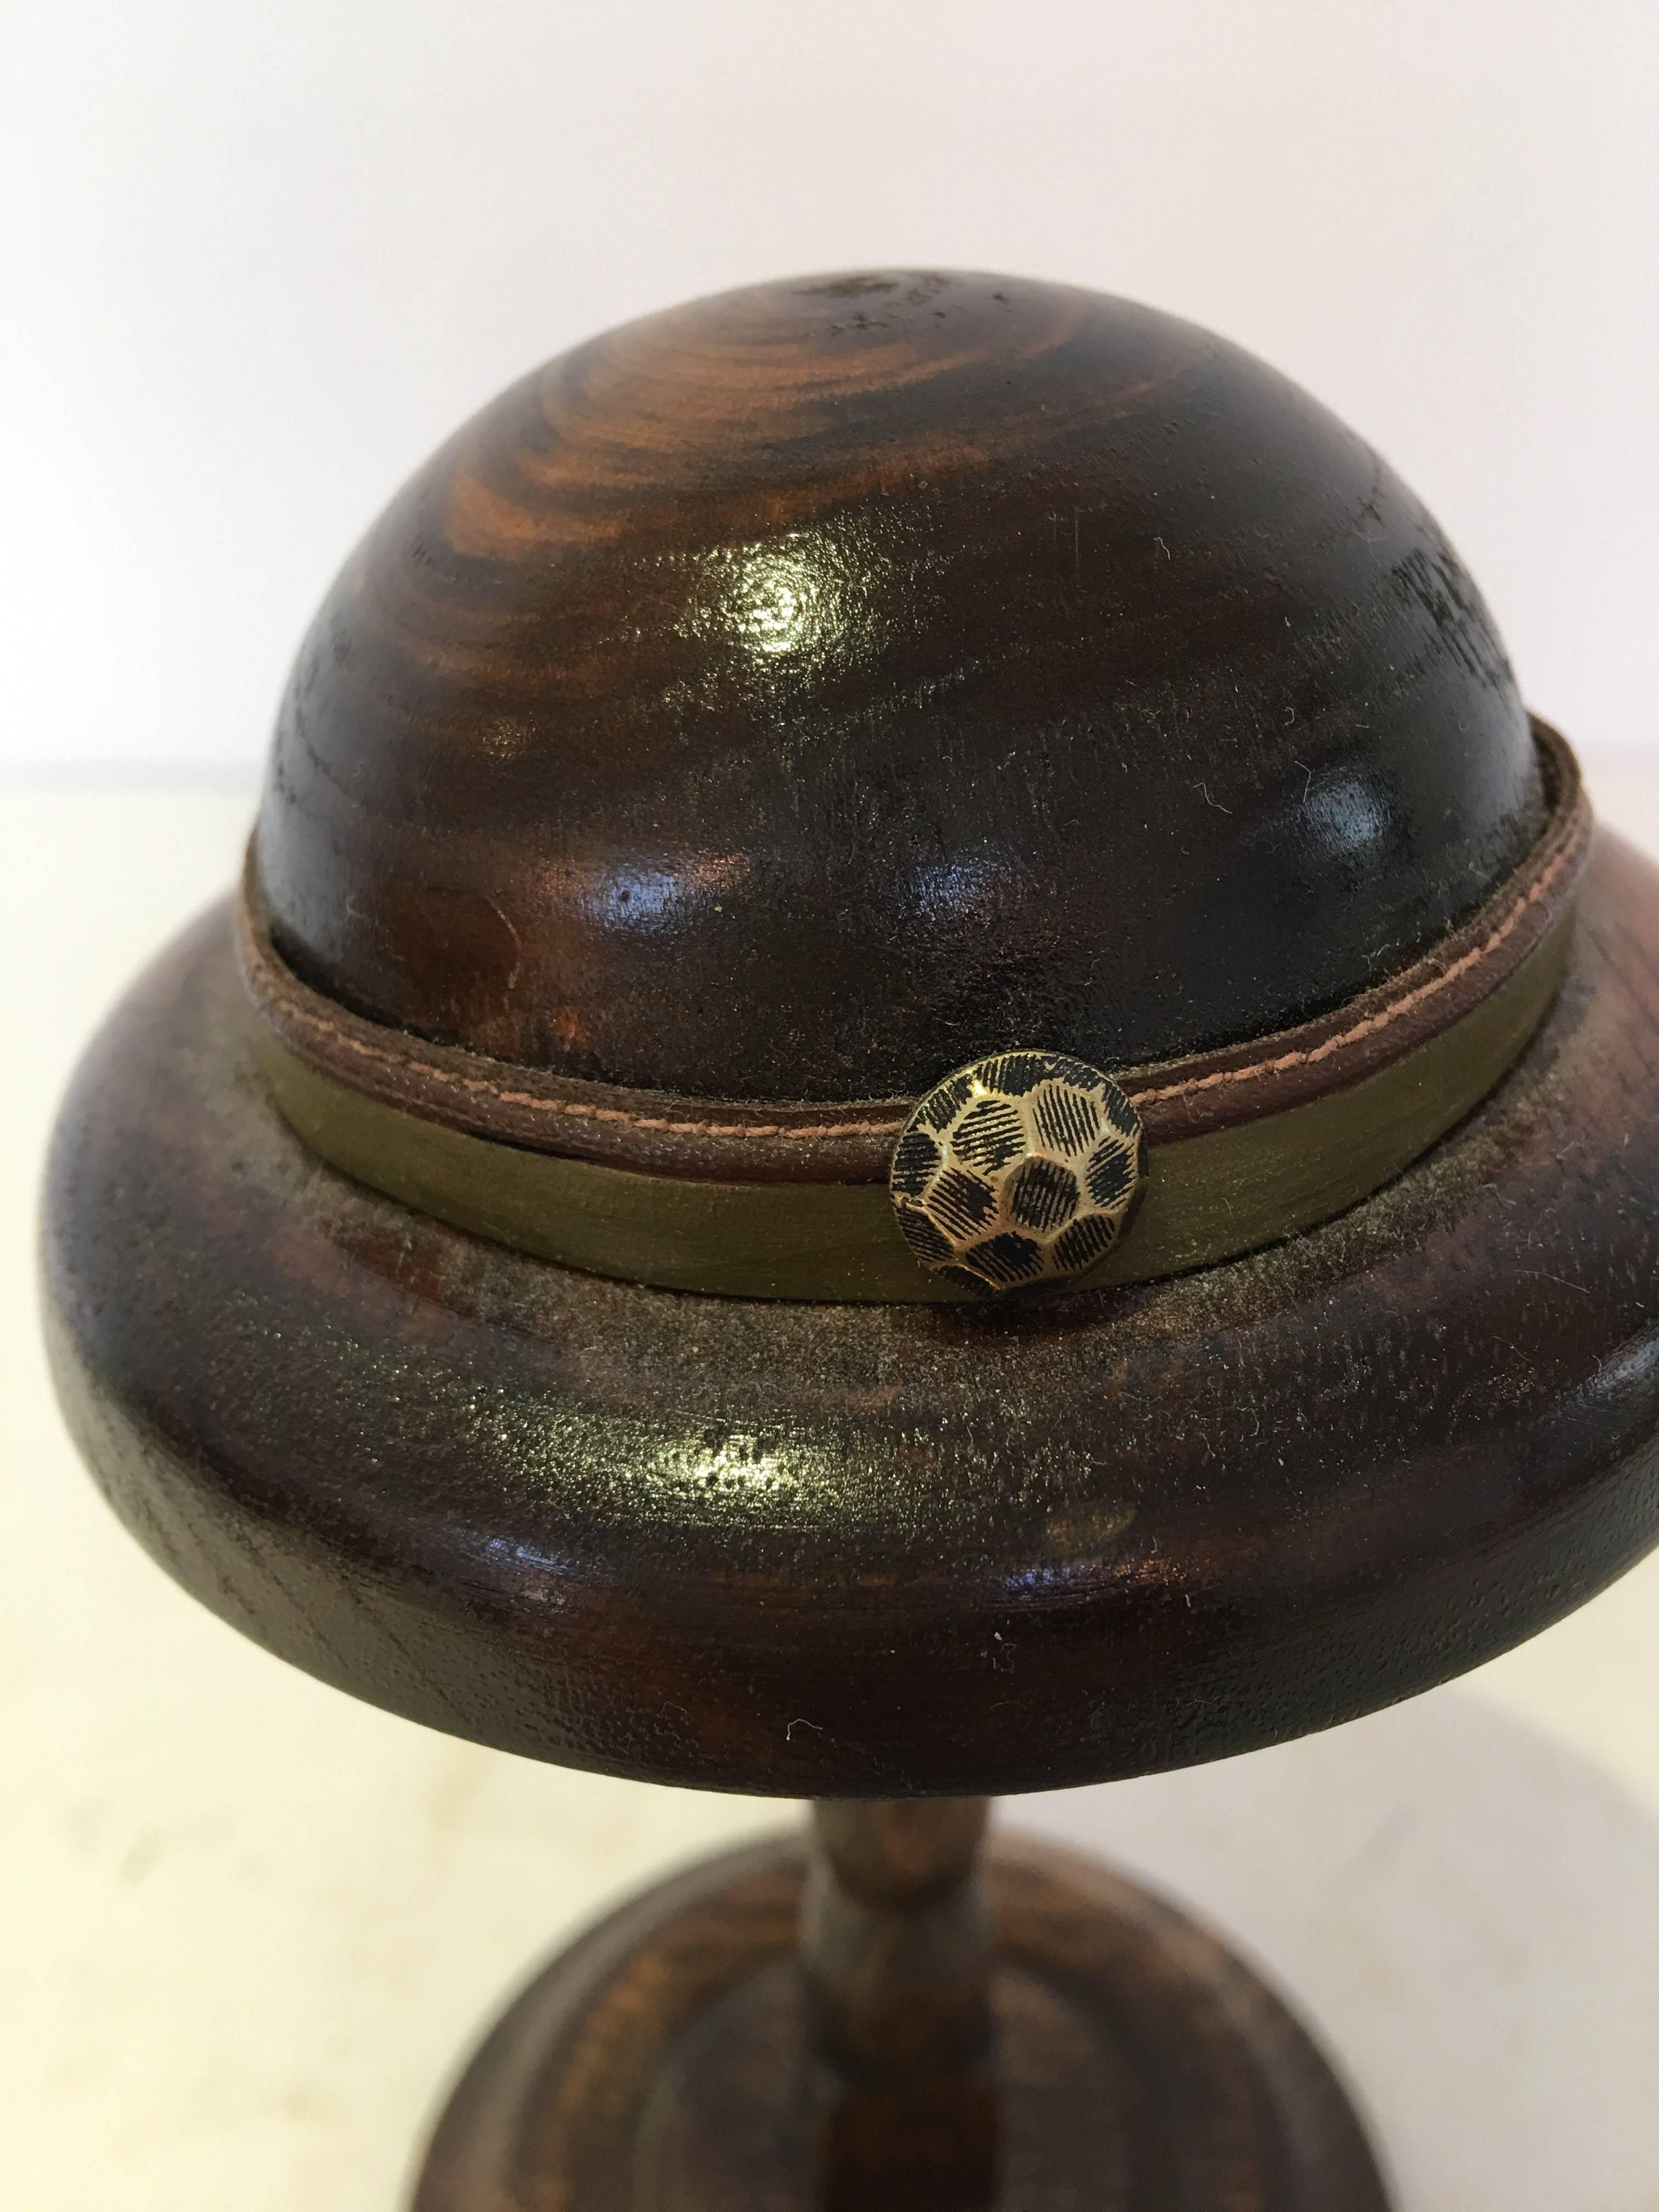 Exquisite English wood doll hat form mold on wood stand
circa 1920-1940s #3503
Green leather brim with round metal stud detail.